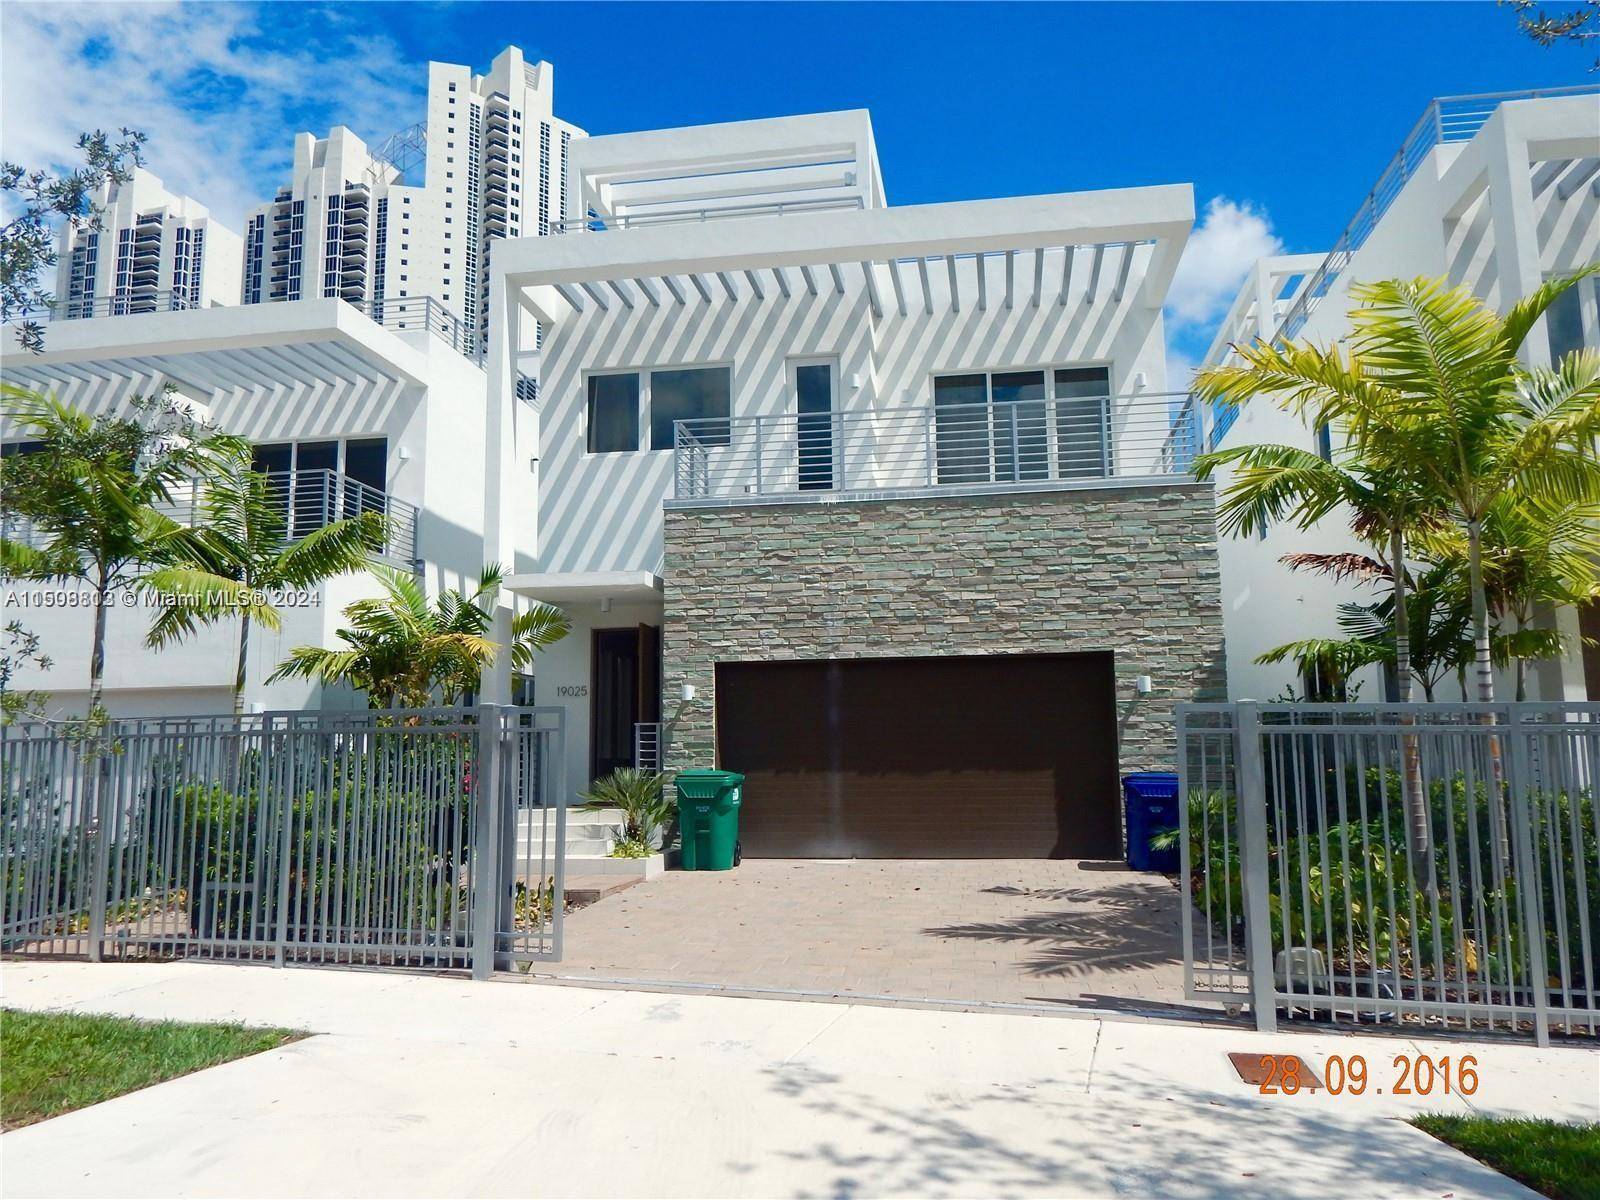 Modern two story pool home in Sunny Isles nestled steps away from the beach and sand.